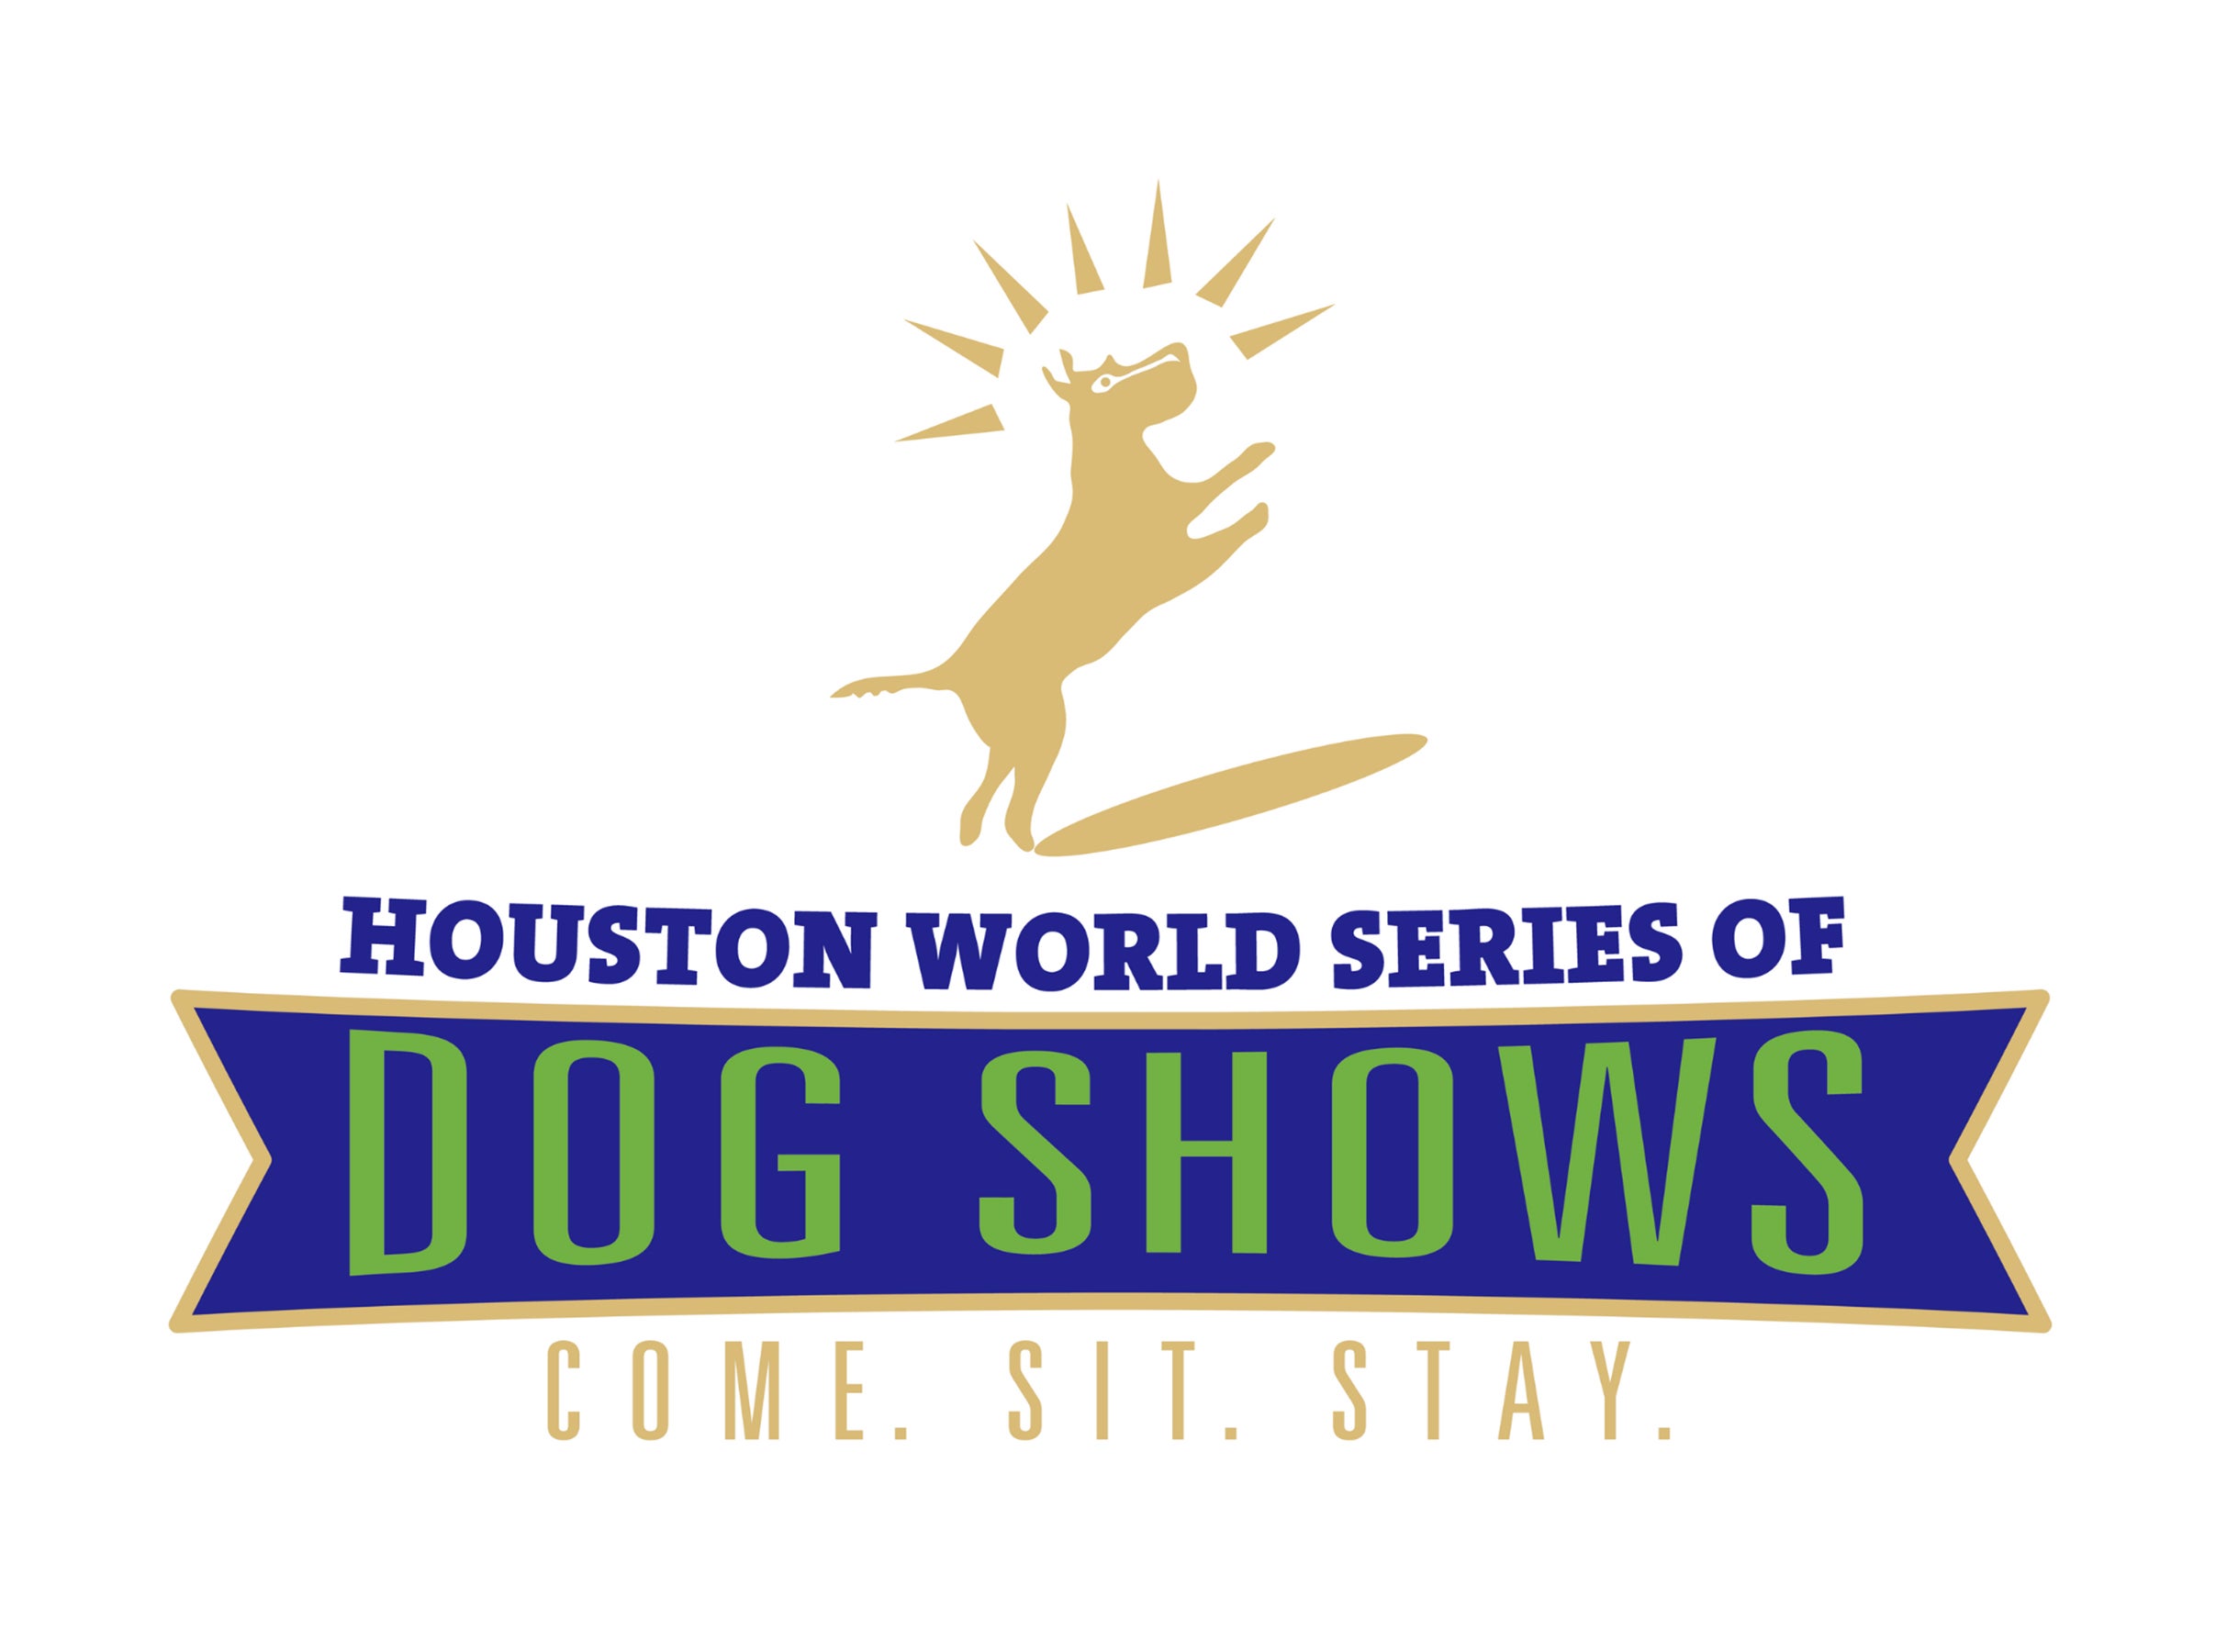 Houston World Series of Dog Shows Weekend Single-Day Pass in Houston promo photo for Team Gillman Subaru North presale offer code